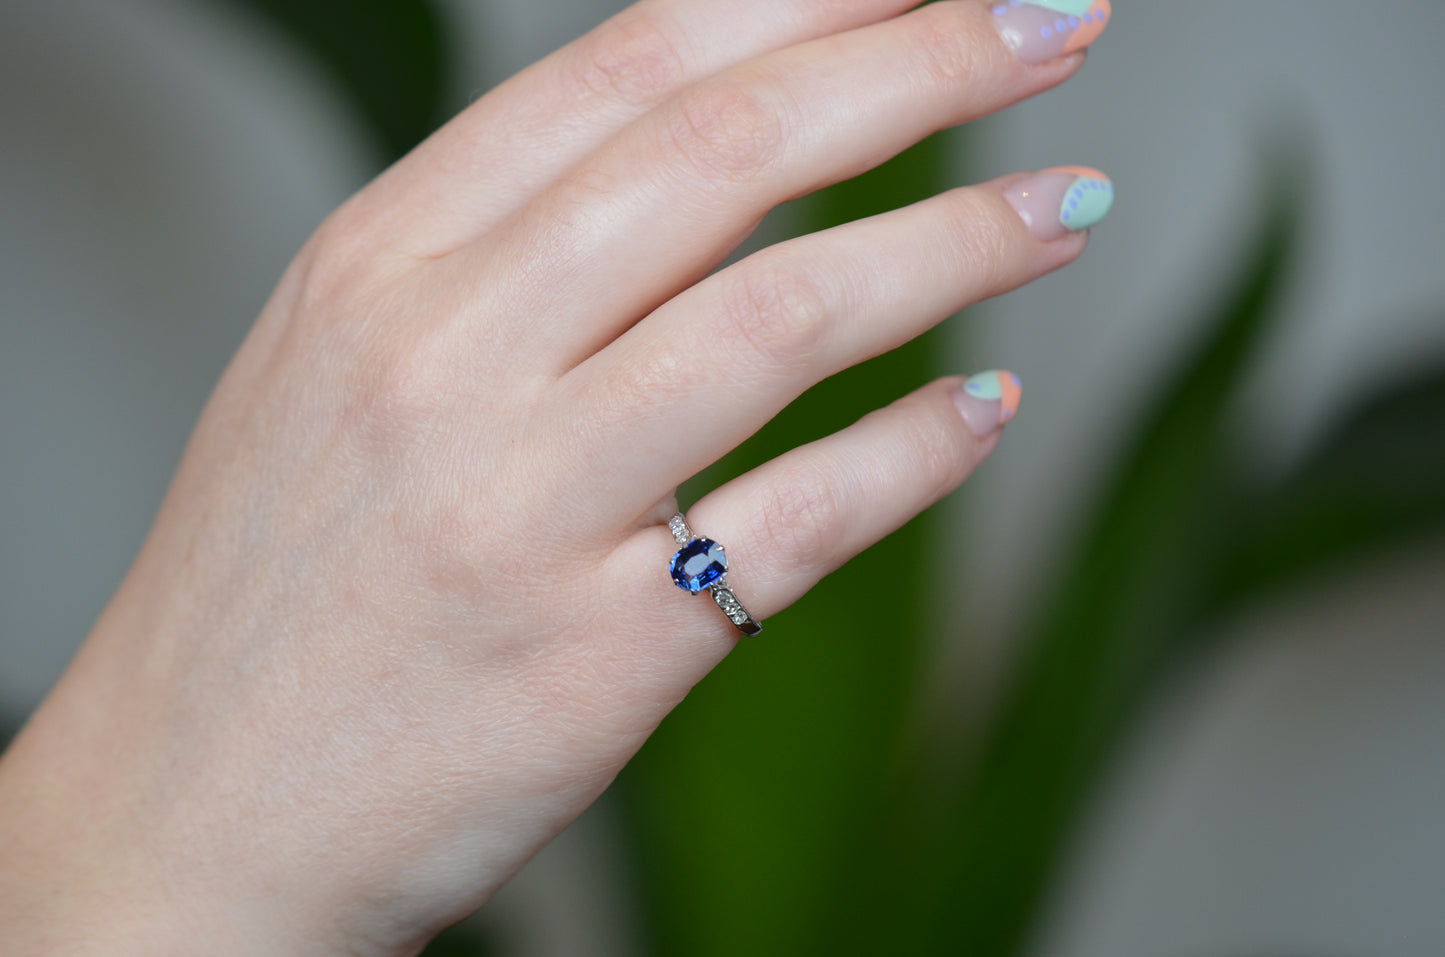 Exquisite Edwardian Sapphire Ring